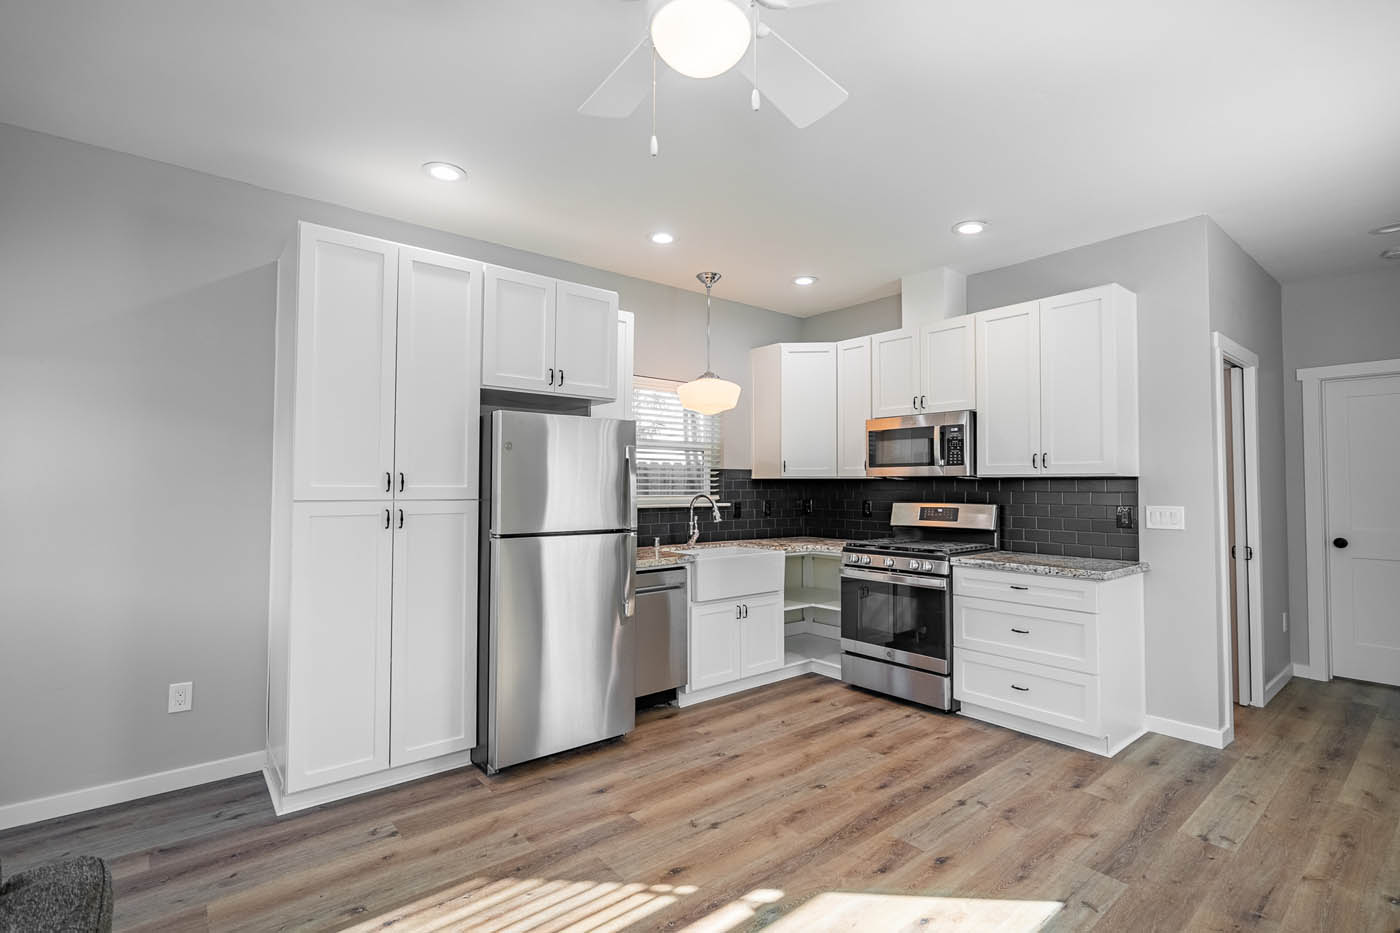 A beautiful white kitchen in an ADU home, contact our Salt Lake City tiny house company today.